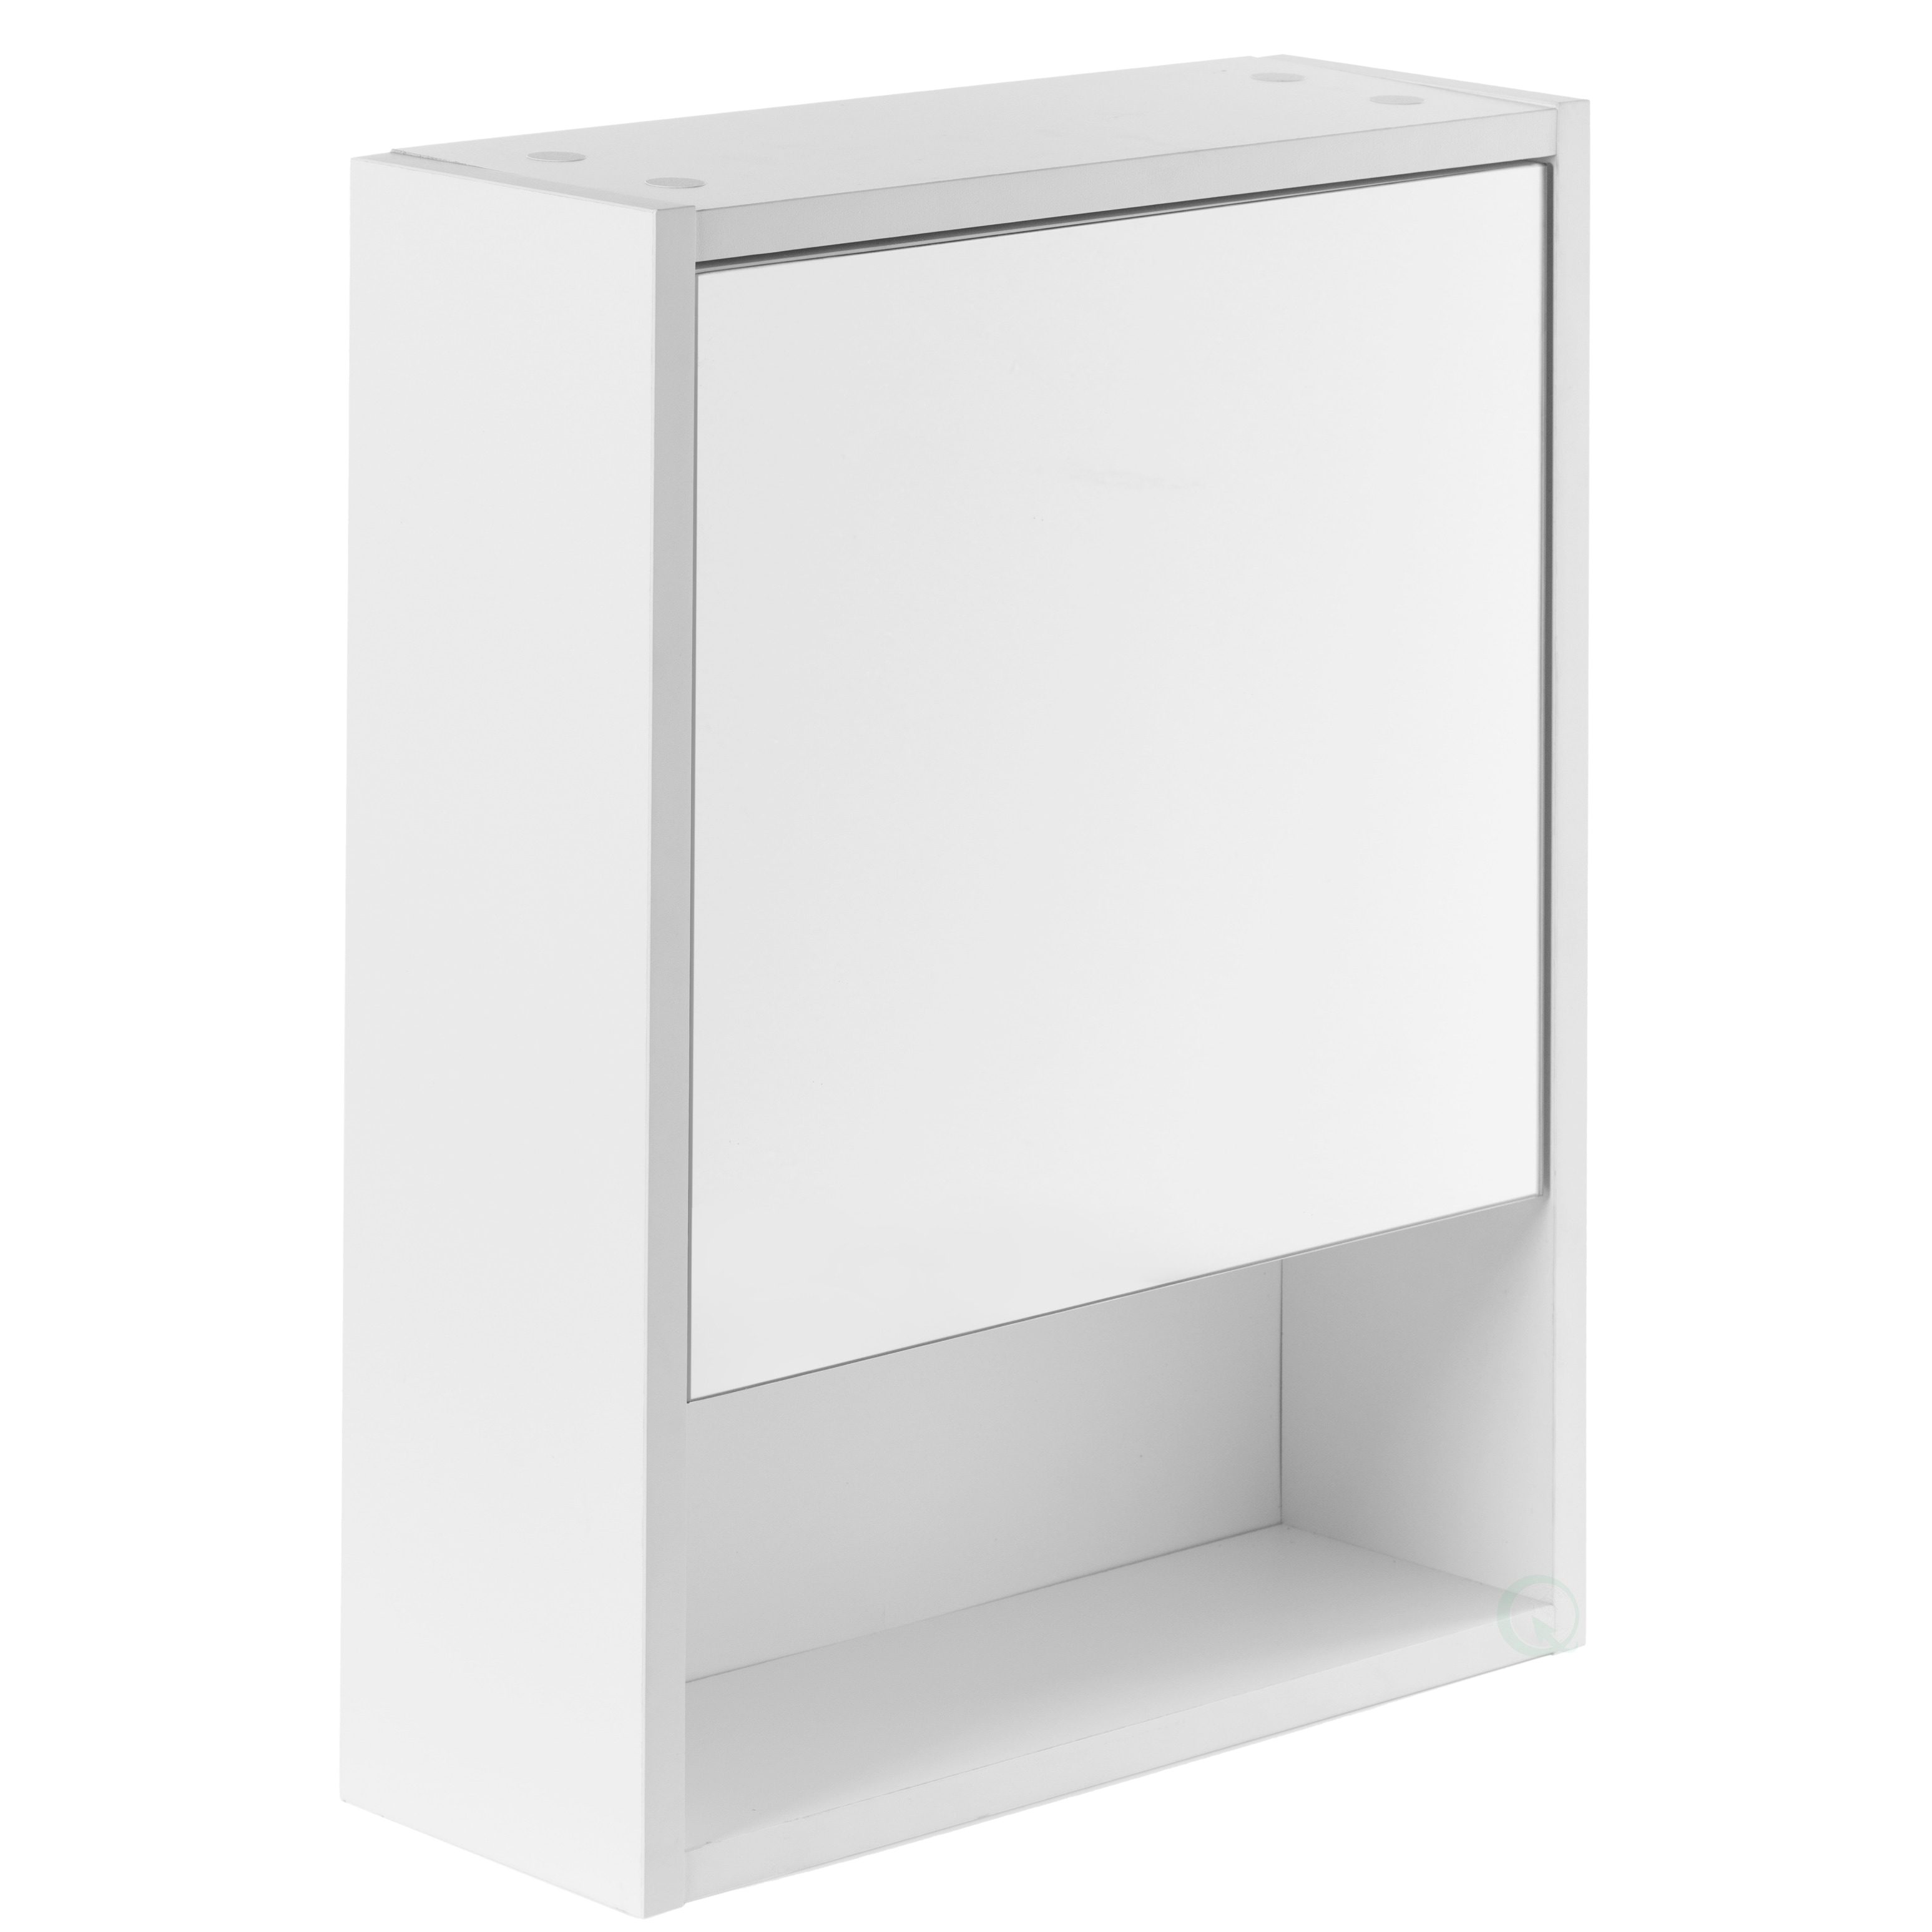 https://ak1.ostkcdn.com/images/products/is/images/direct/89b02108af0bb03697603e71bedd2ff7553776ae/White-Wall-Mounted-Bathroom-Storage-Cabinet%2C-Mirrored-Vanity-Medicine-Chest-with-3-Shelves.jpg